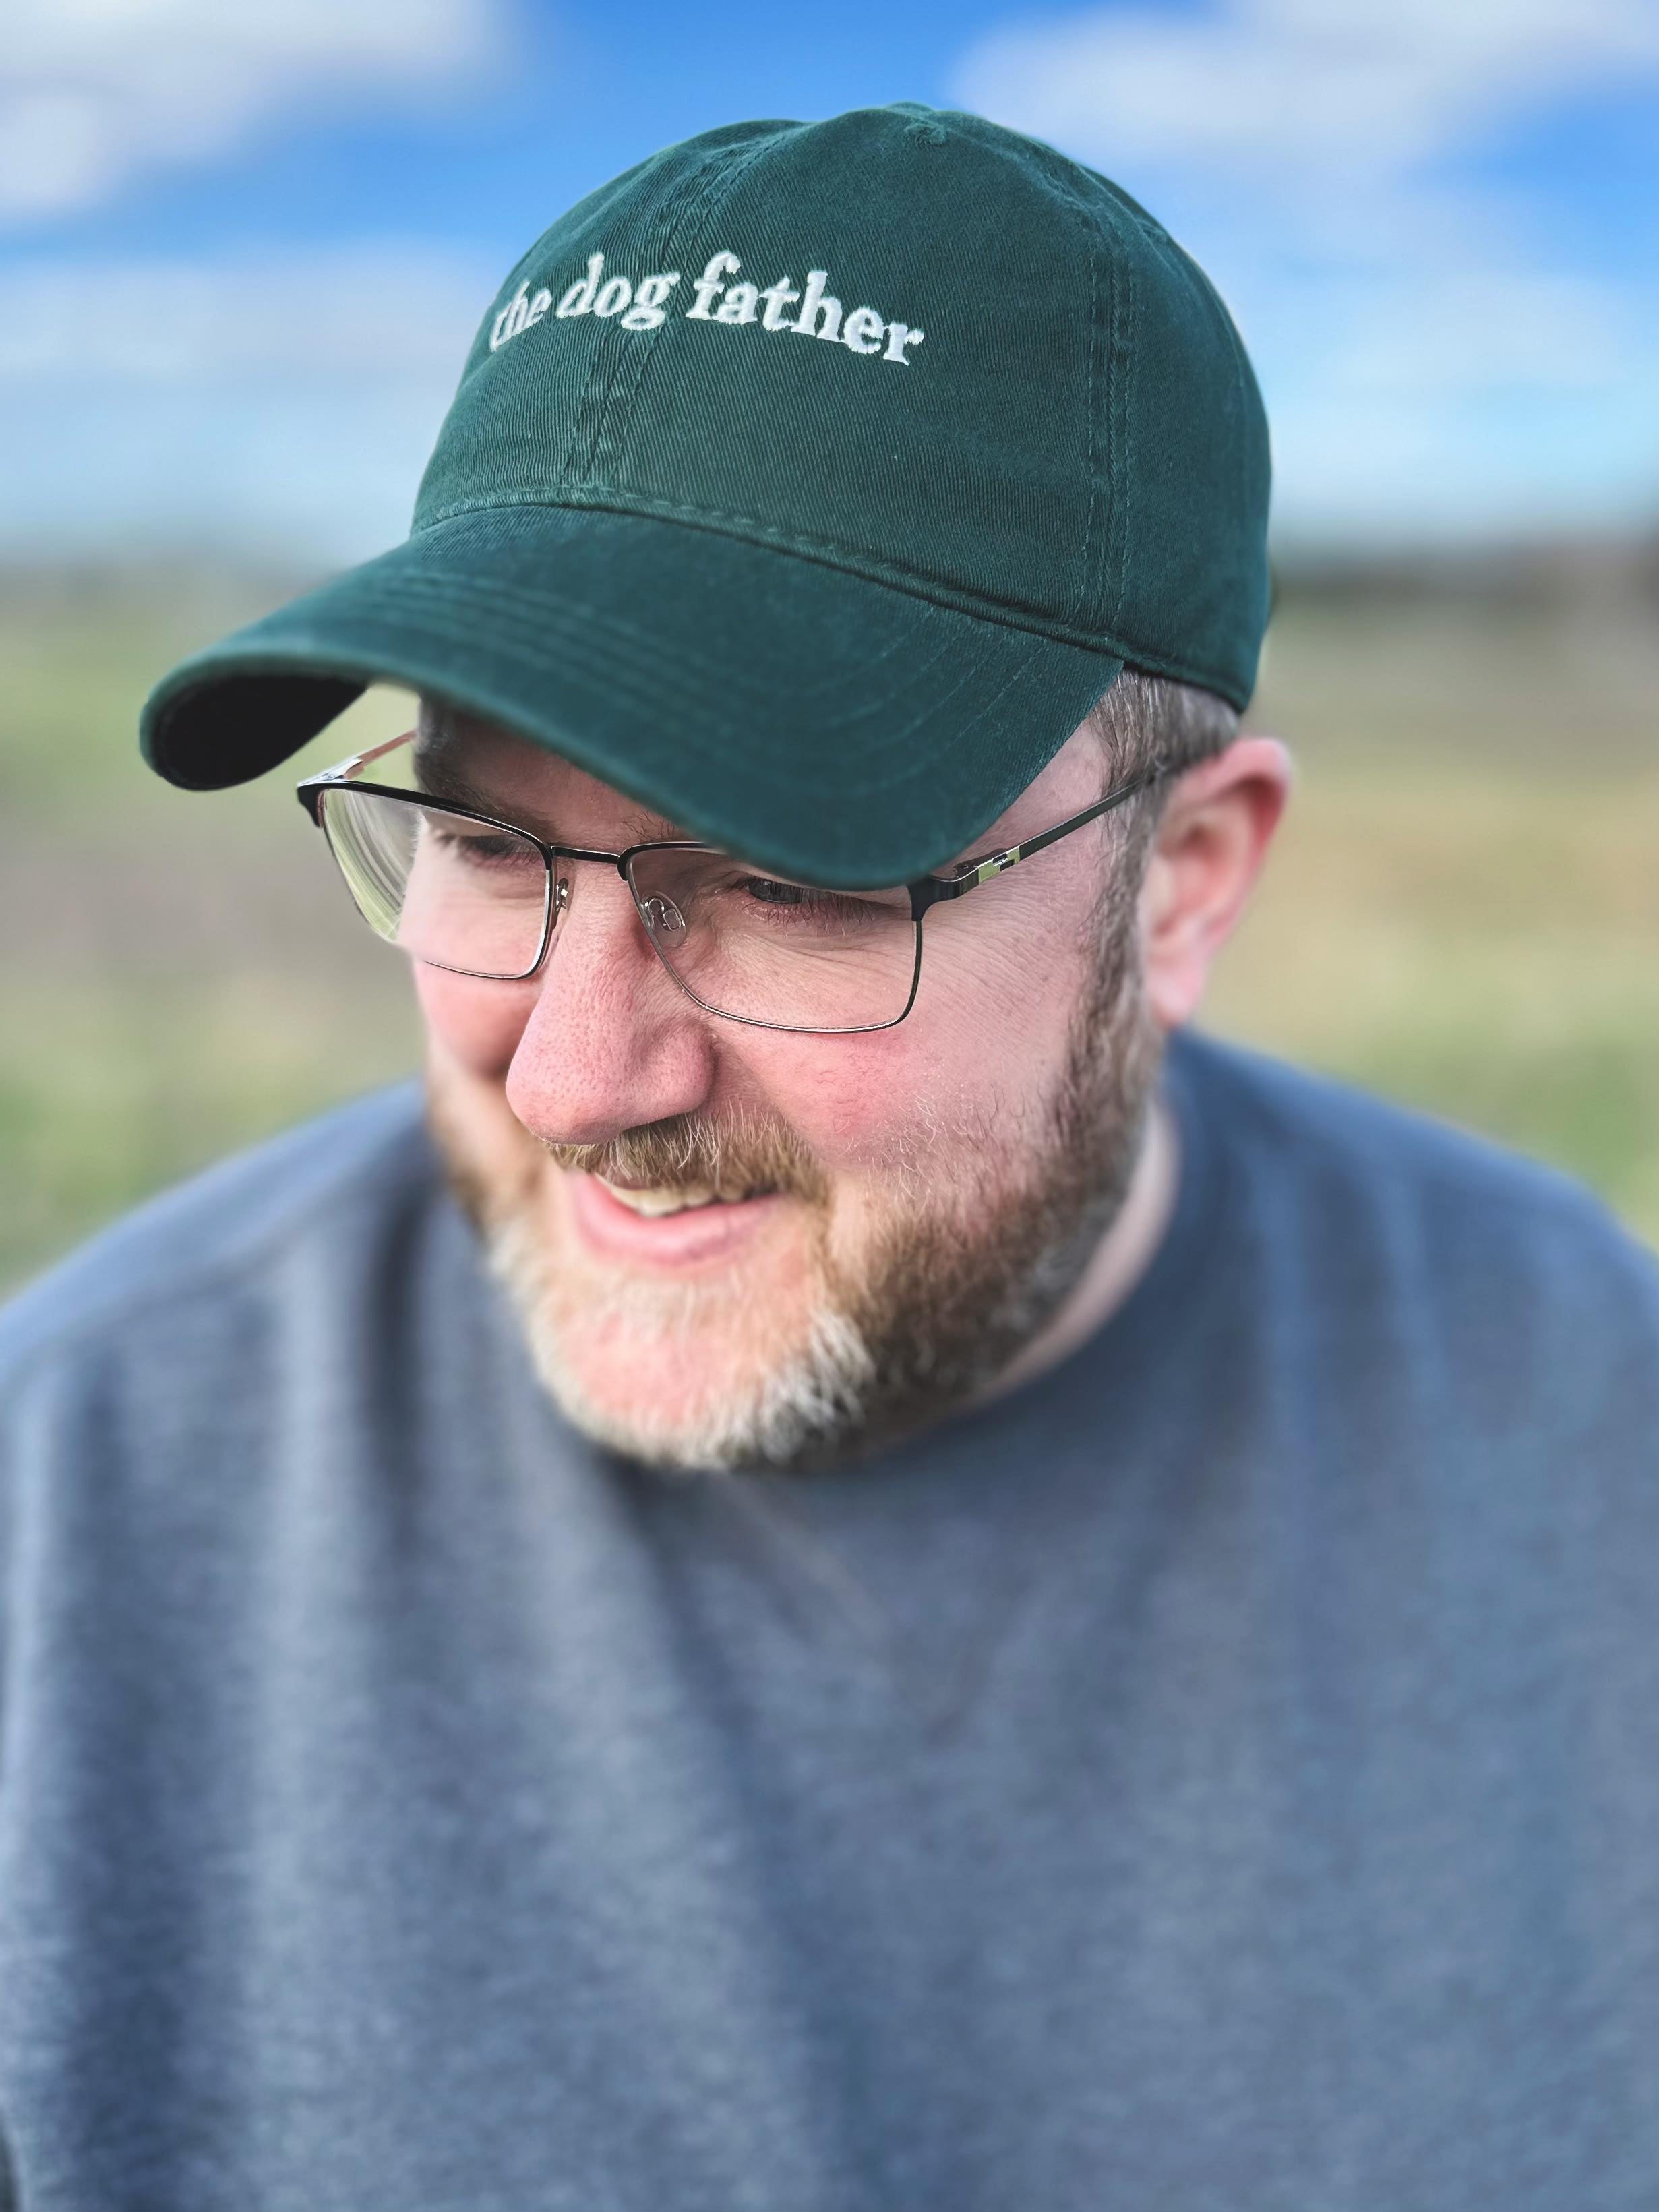 The Dog Father Hat